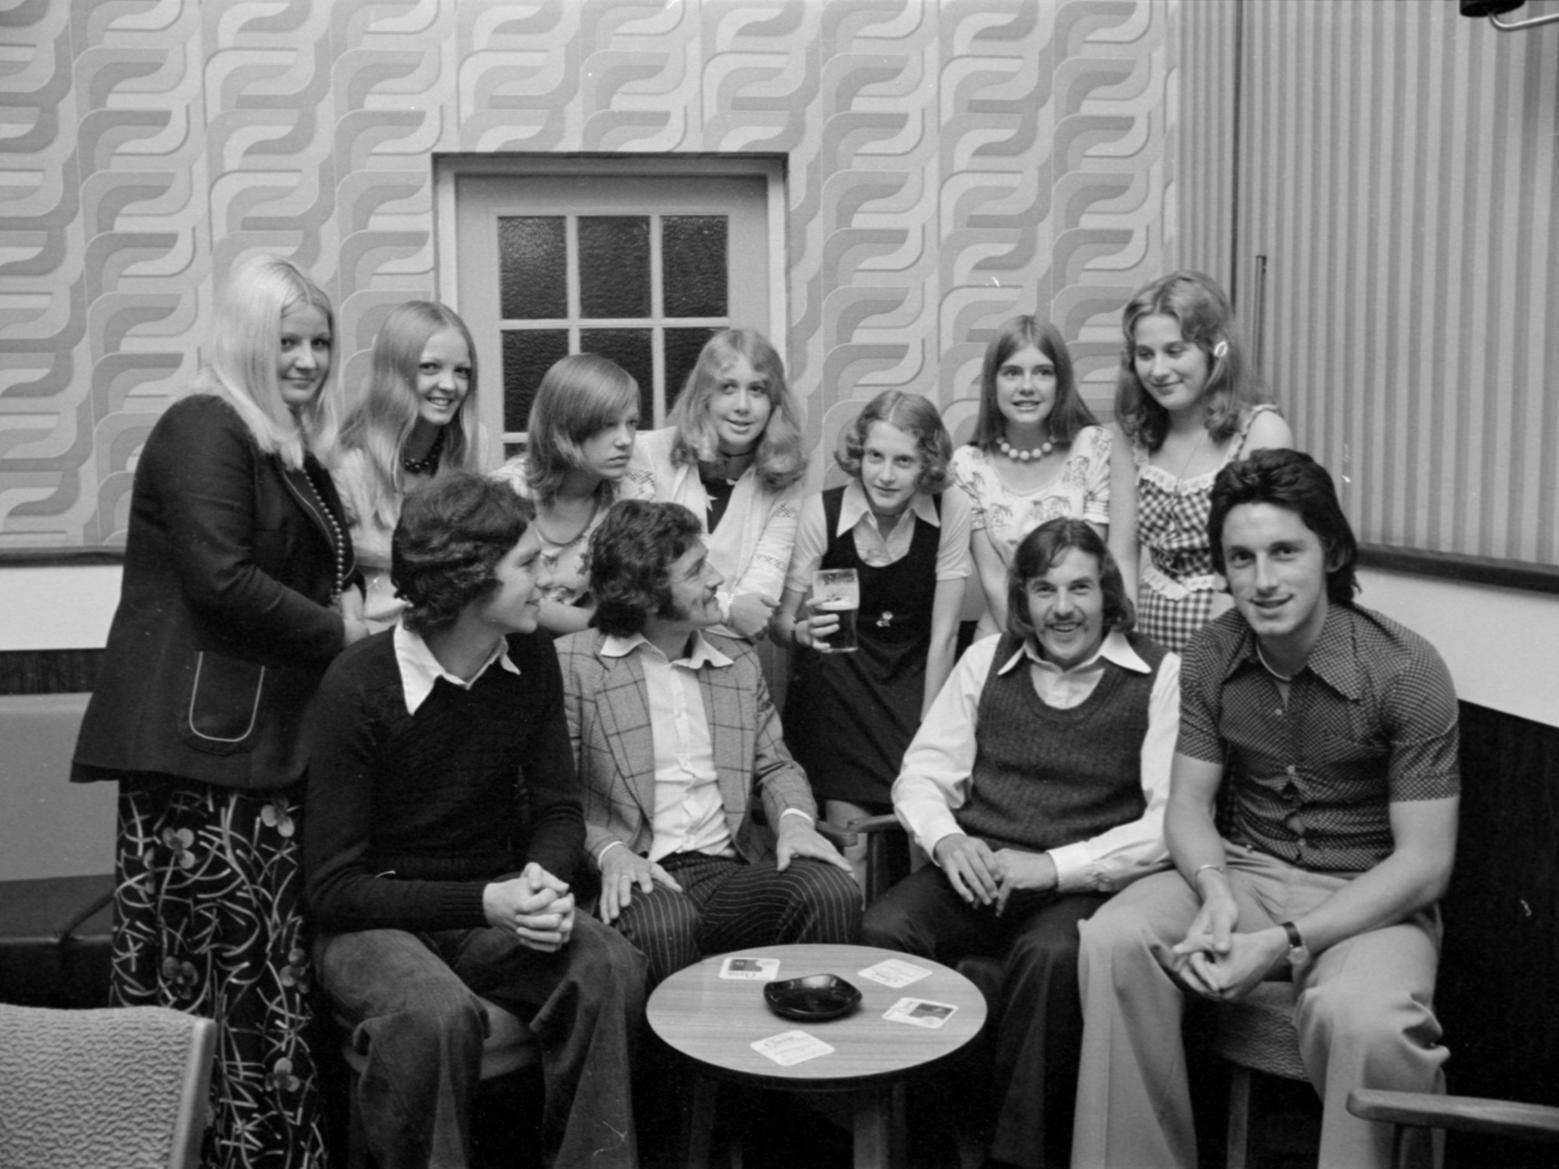 PNE fans meet four of the players at a supporters' club party in the 1970s